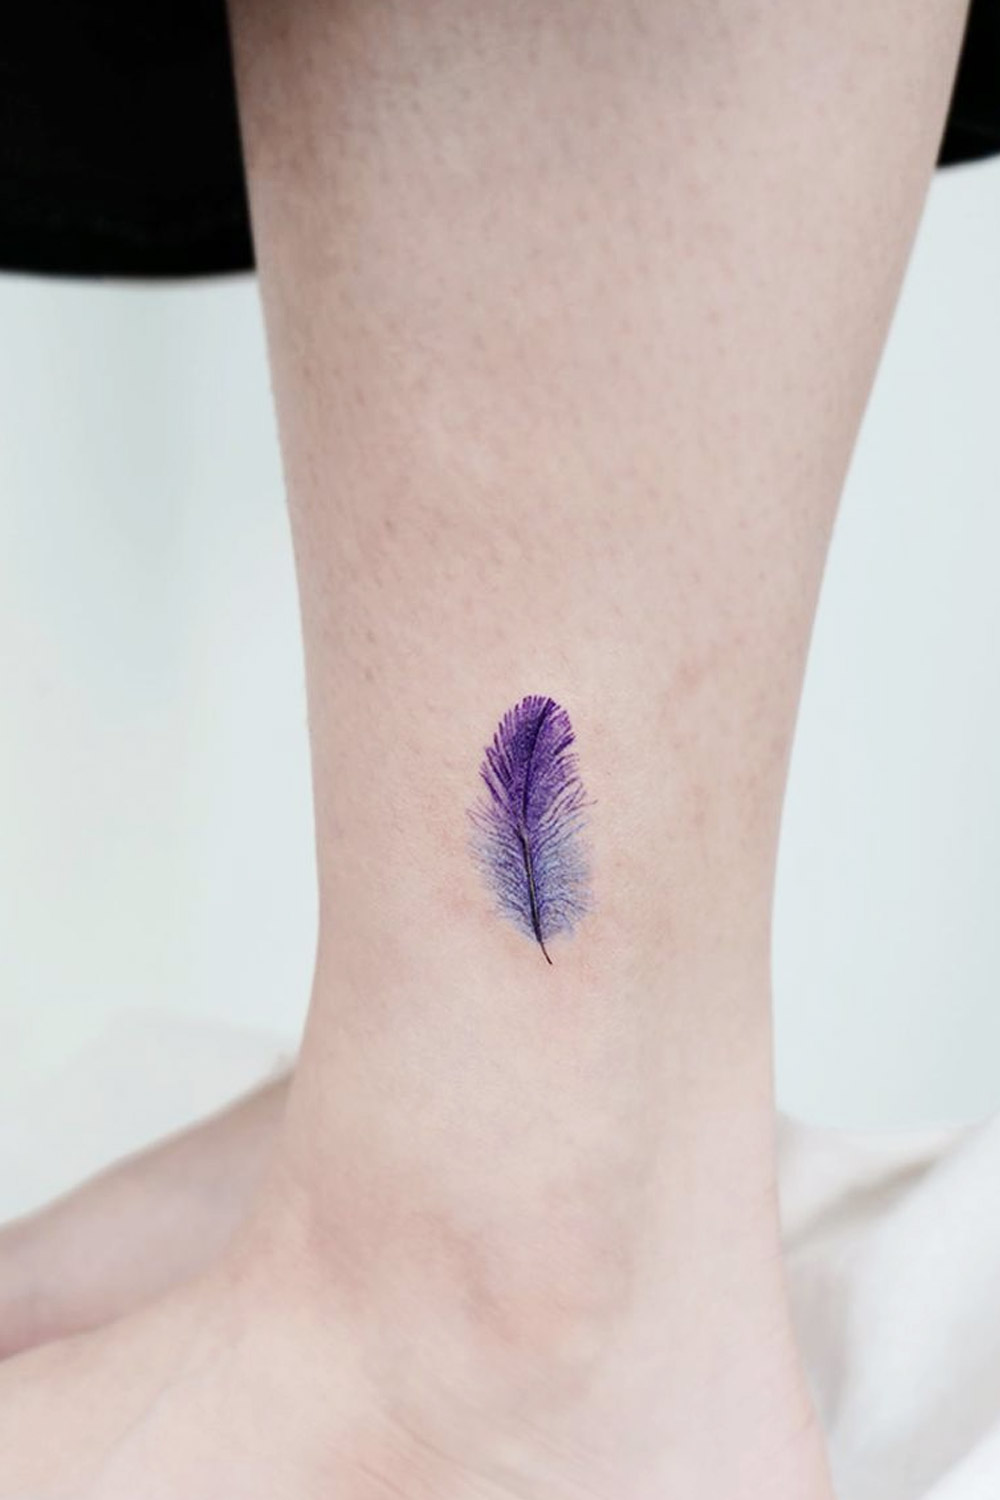 Small feather tattoo on the ankle.